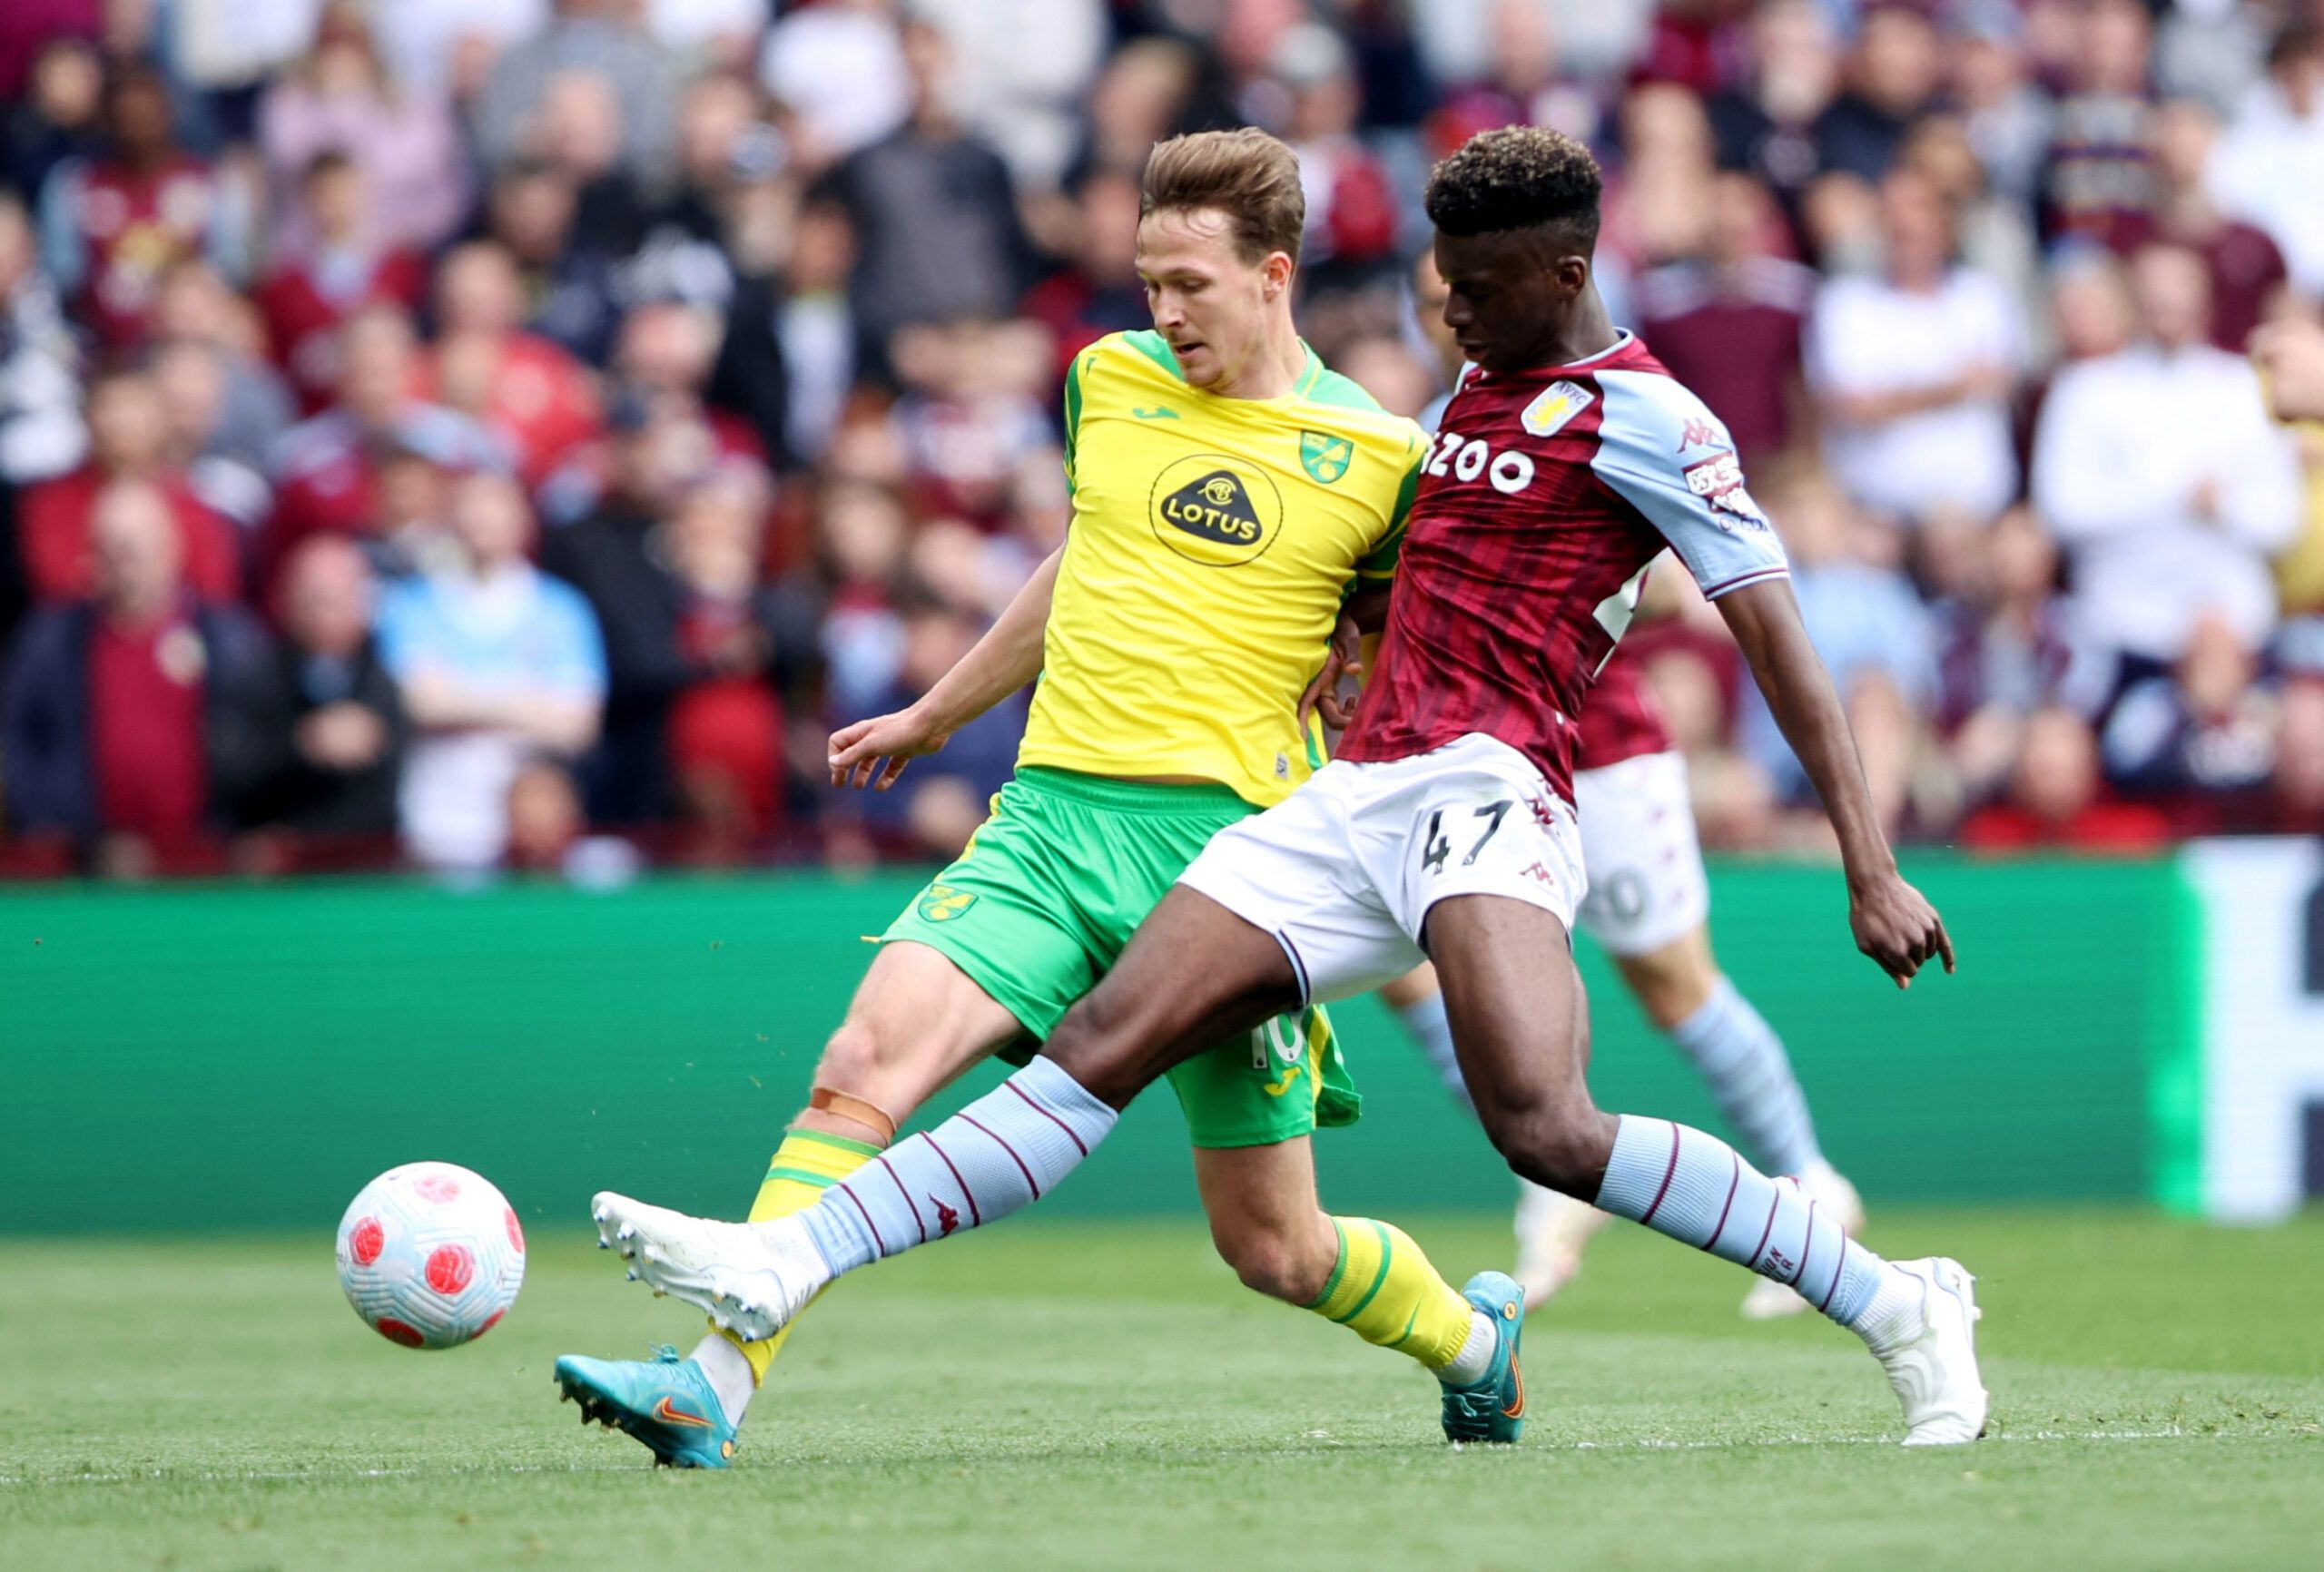 Soccer Football - Premier League - Aston Villa v Norwich City - Villa Park, Birmingham, Britain - April 30, 2022 Aston Villa's Tim Iroegbunam in action with Norwich City's Kieran Dowell Action Images via Reuters/Molly Darlington EDITORIAL USE ONLY. No use with unauthorized audio, video, data, fixture lists, club/league logos or 'live' services. Online in-match use limited to 75 images, no video emulation. No use in betting, games or single club /league/player publications.  Please contact your a